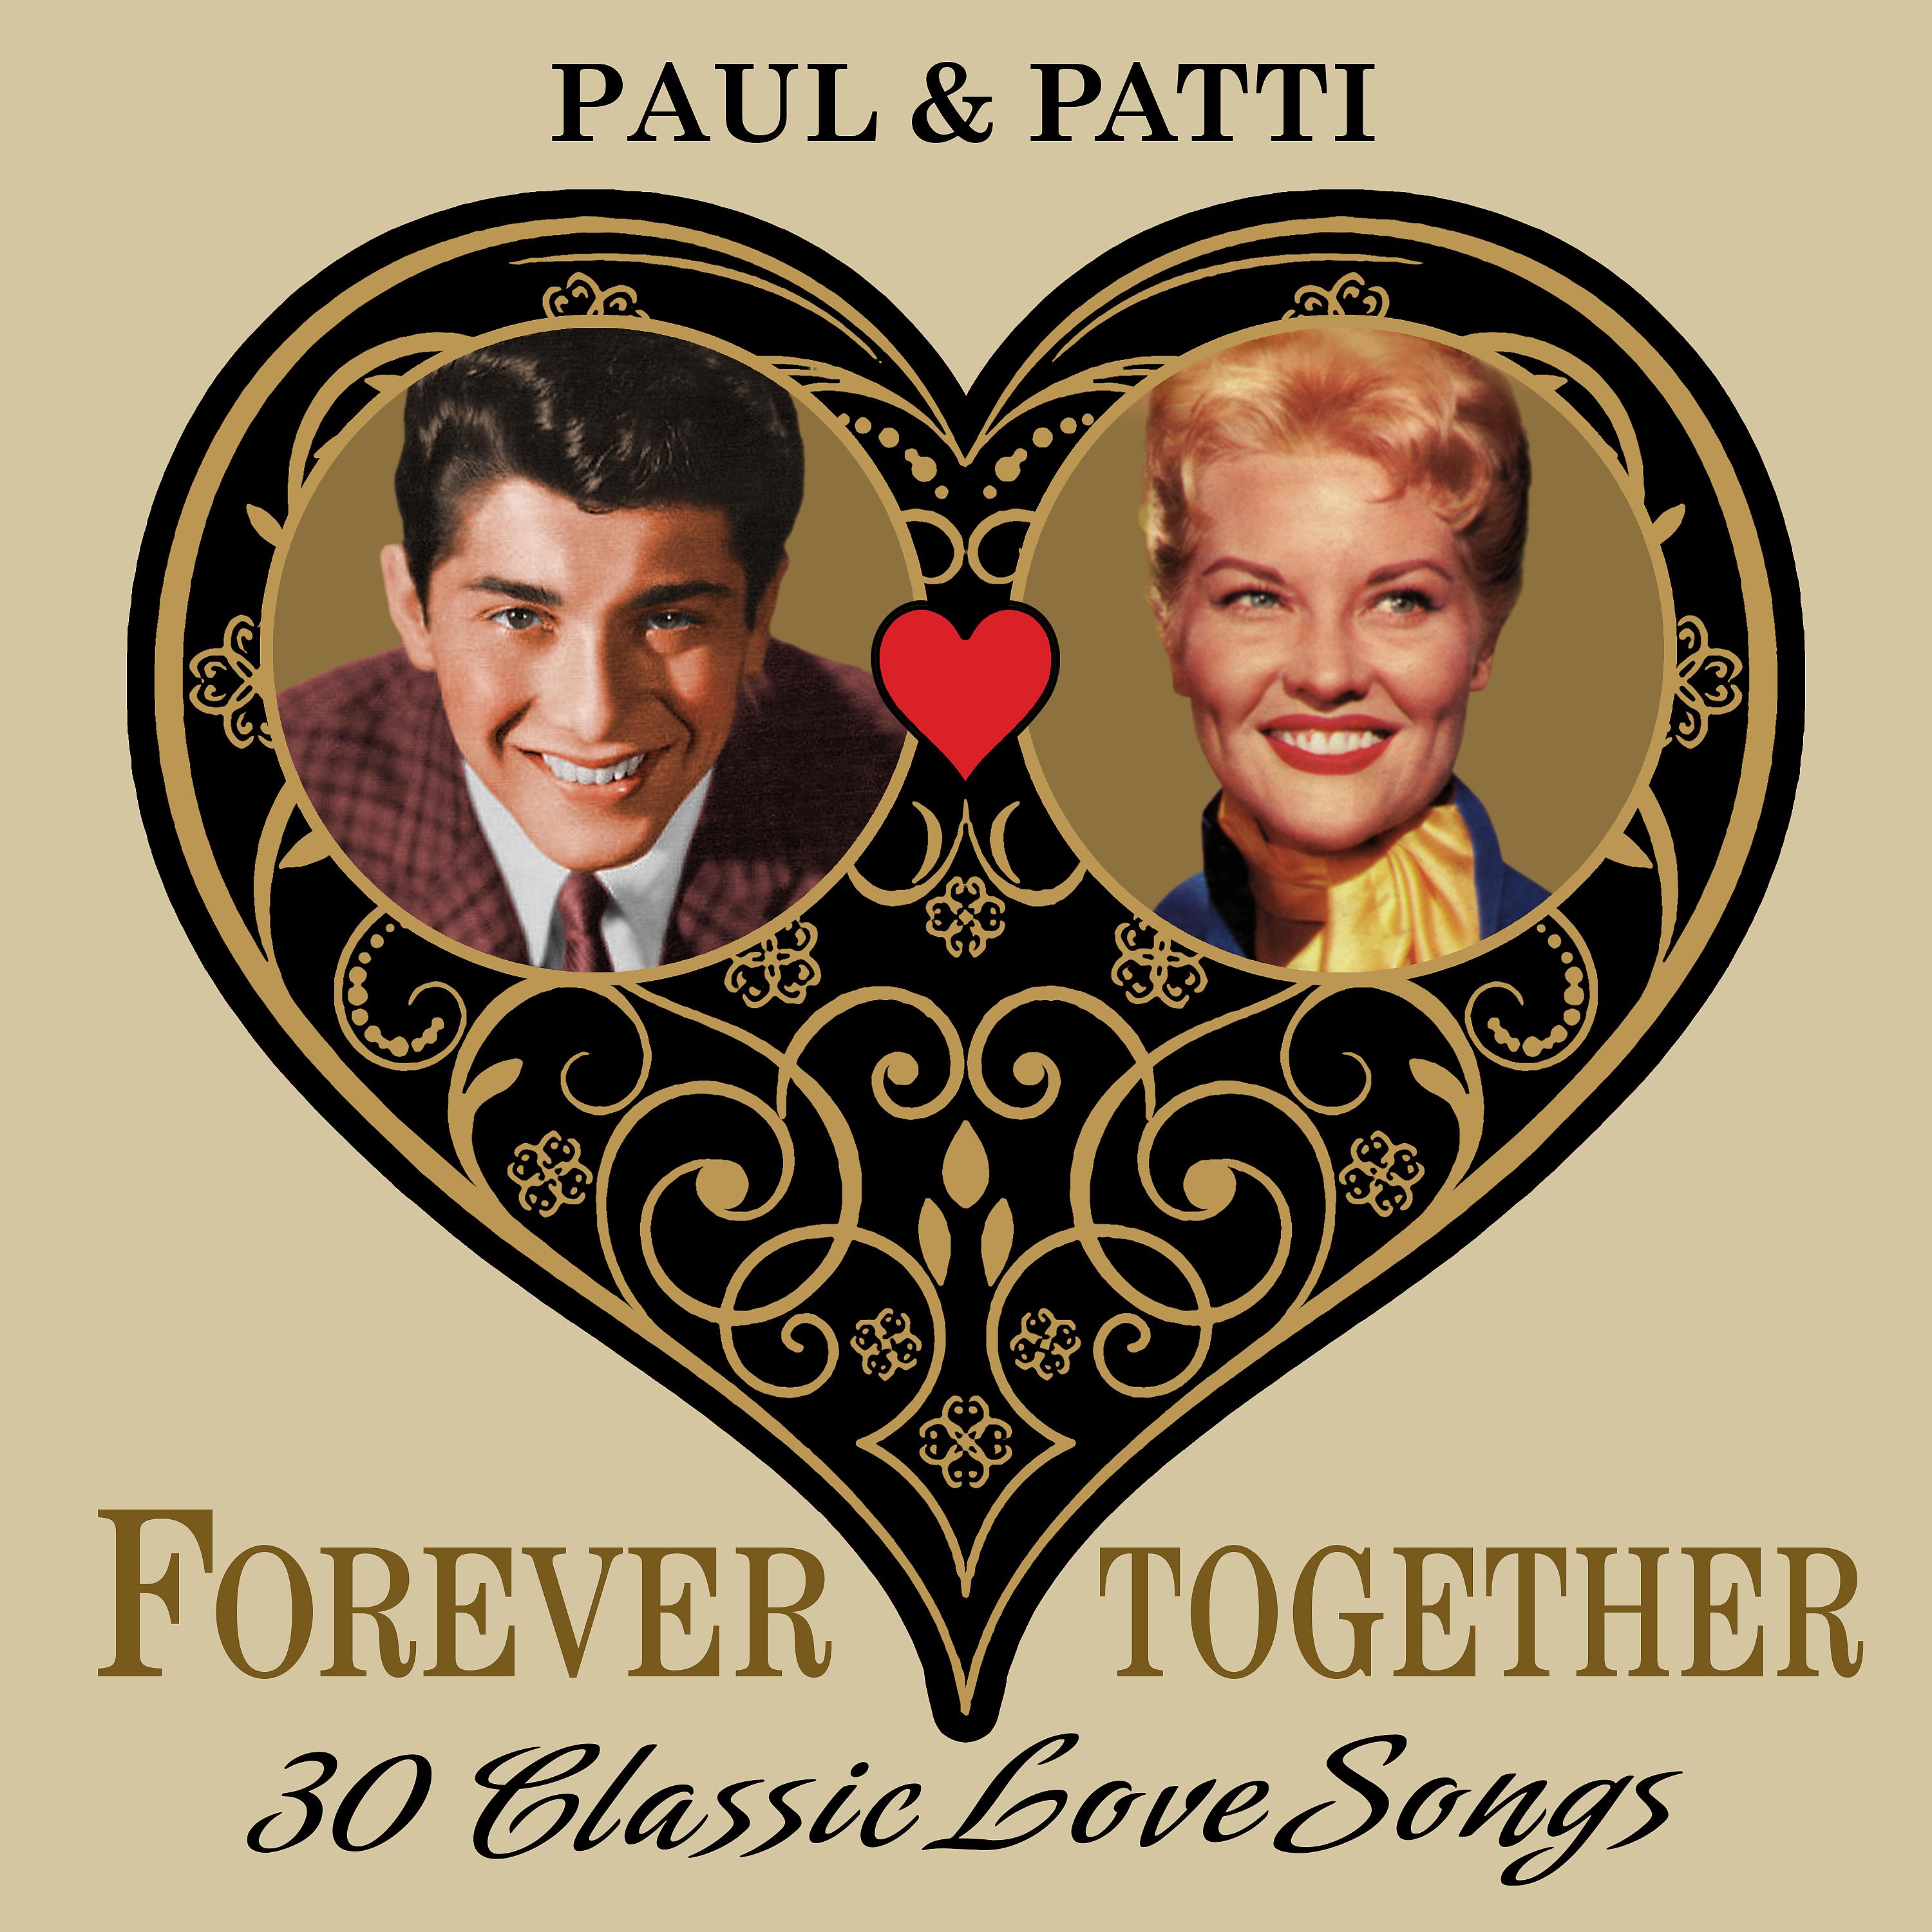 Постер альбома Paul & Patti (Forever Together) 30 Classic Love Songs